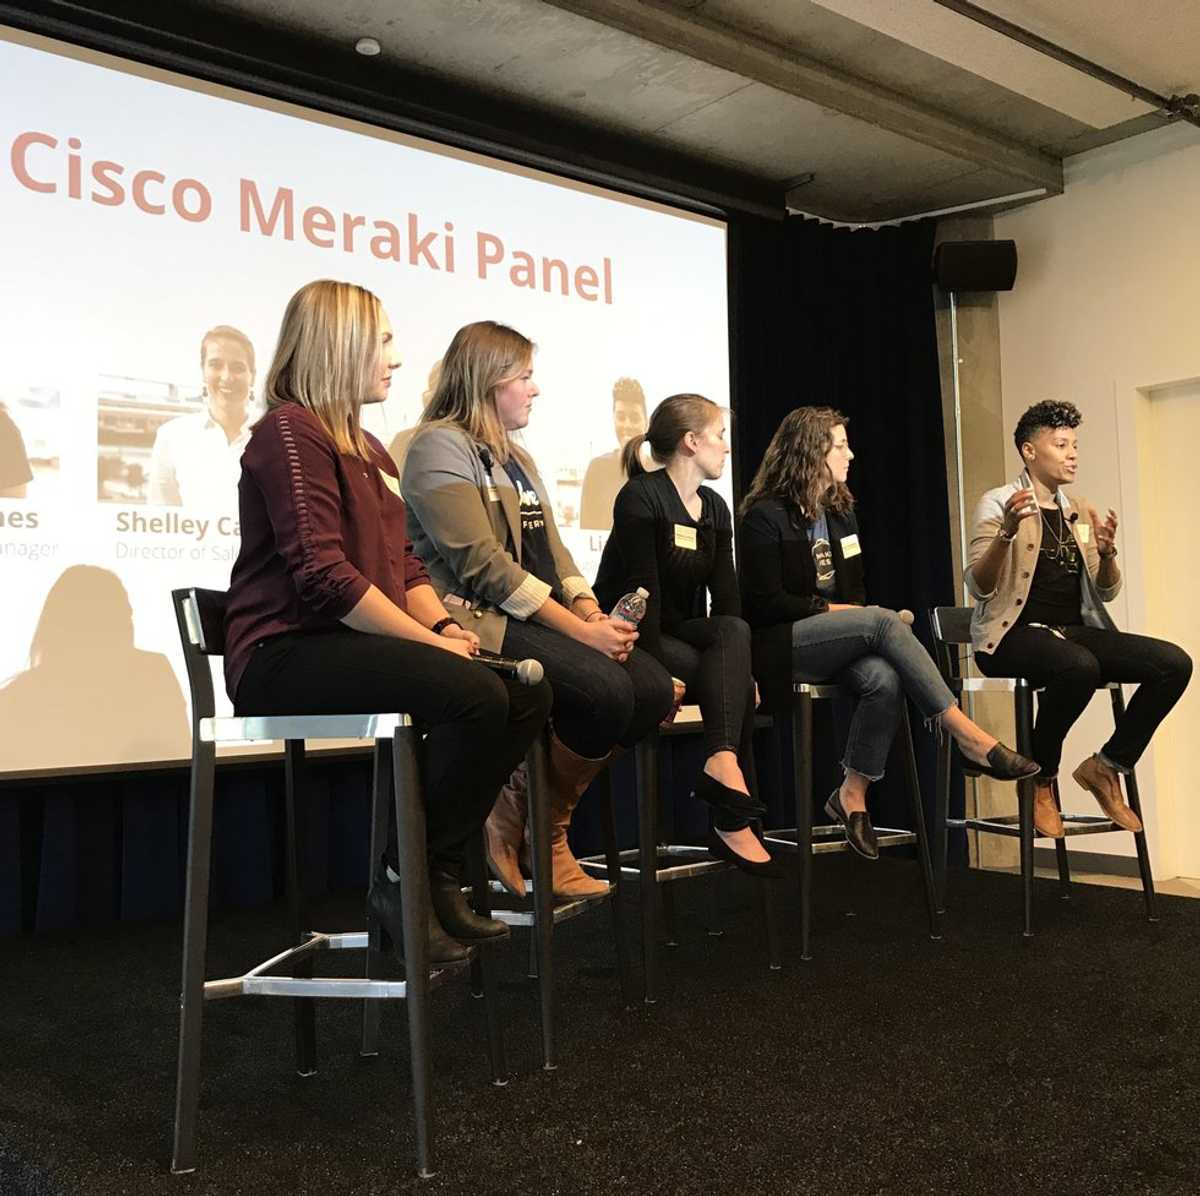 A Look at Our Event with Cisco Meraki